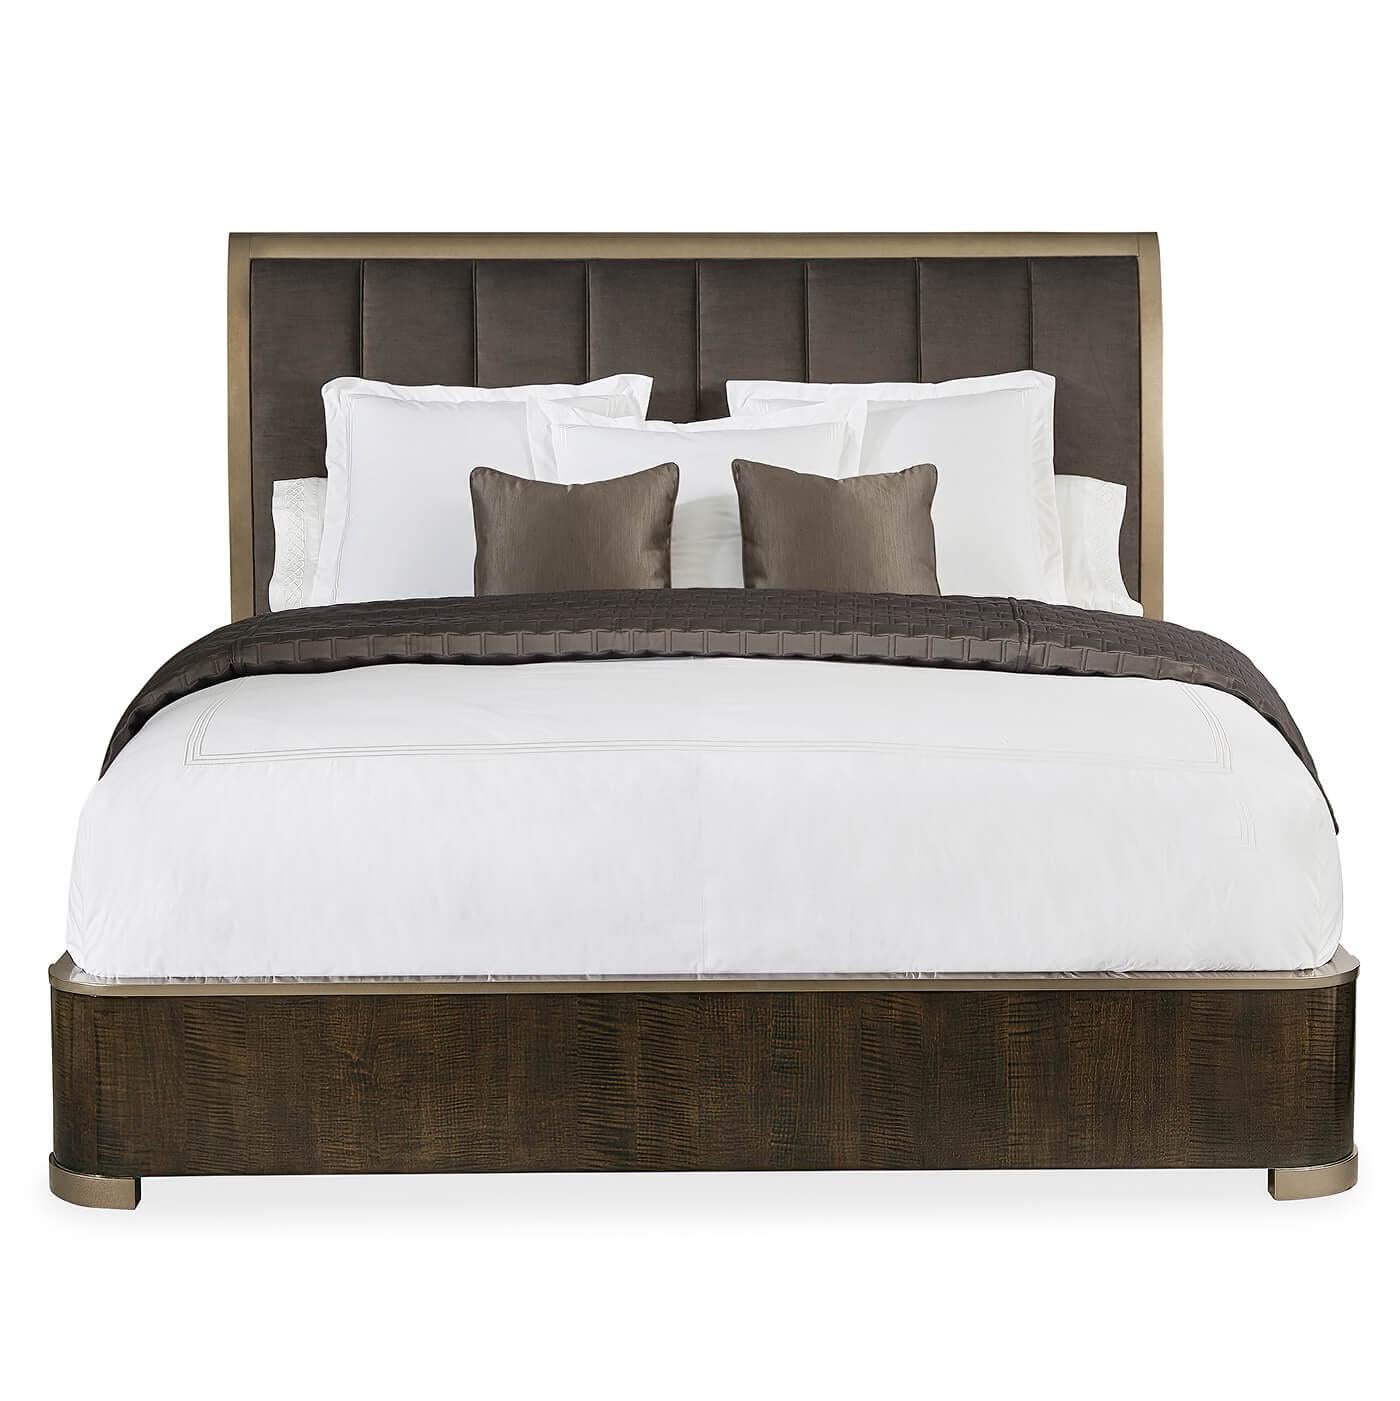 A Mid-Century Modern Classic style king size bed with a soft velvet channel upholstered headboard surrounded by our bronzed finish headboard frame. The base and footboard are of beautifully figured maple stained in a rich dark roast finish. The